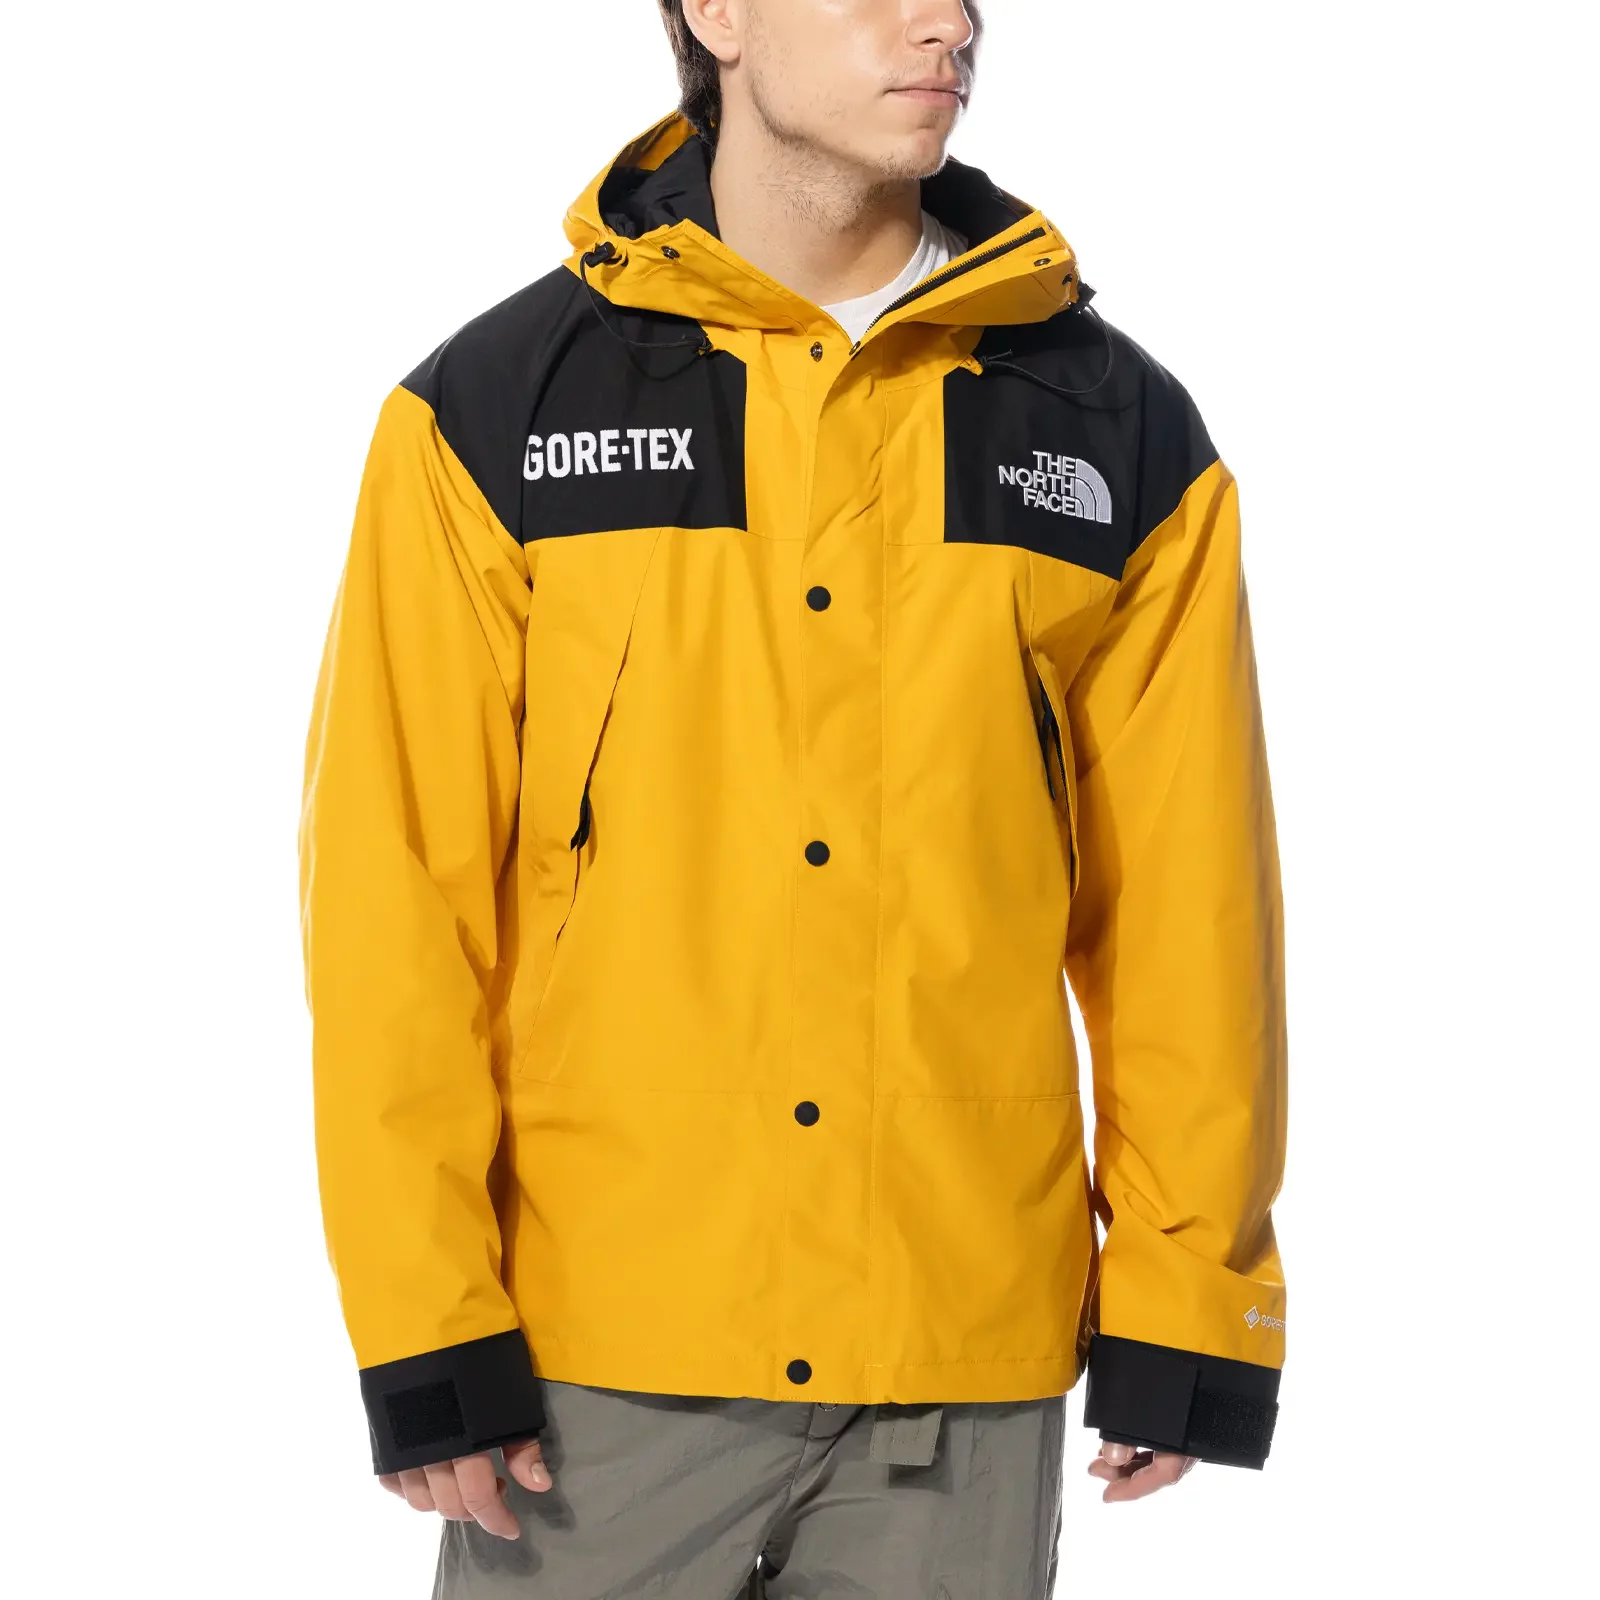 The North Face GTX Mountain Jackets 